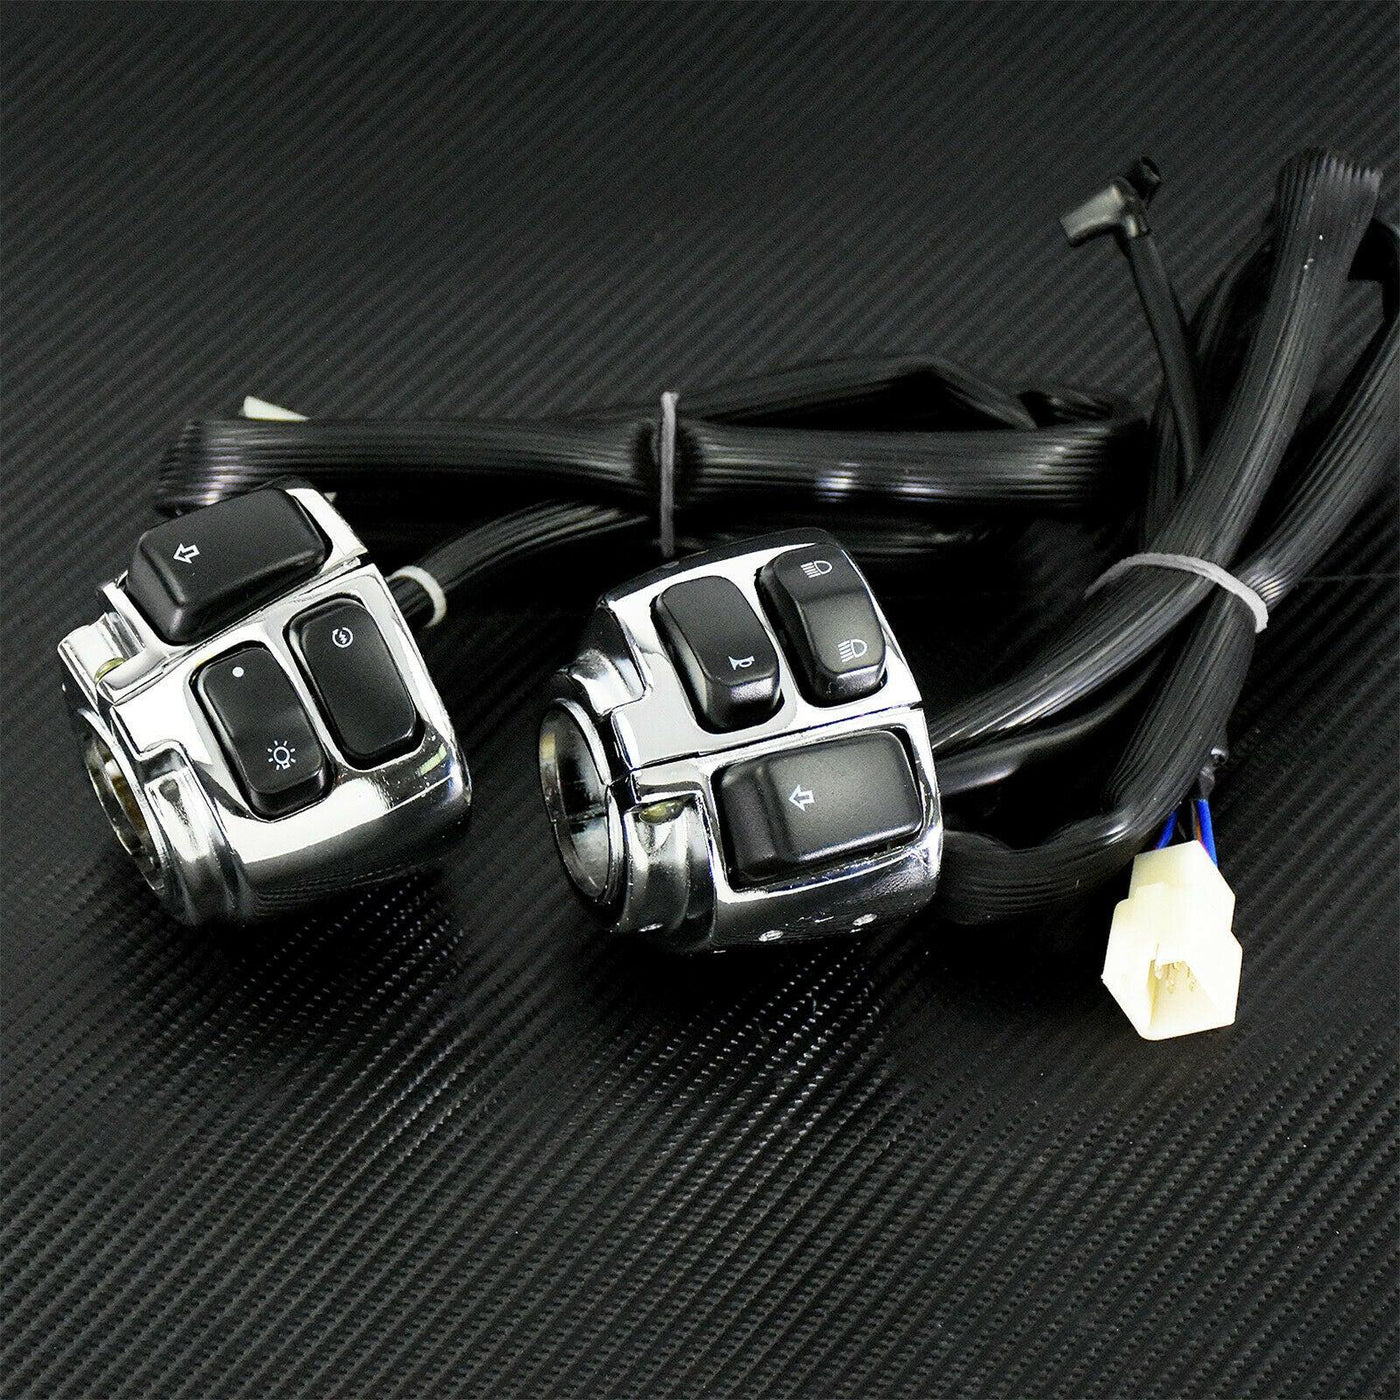 Chrome 1" Handlebar Control Switches+ Wiring Harness Fit For Harley Sportster - Moto Life Products